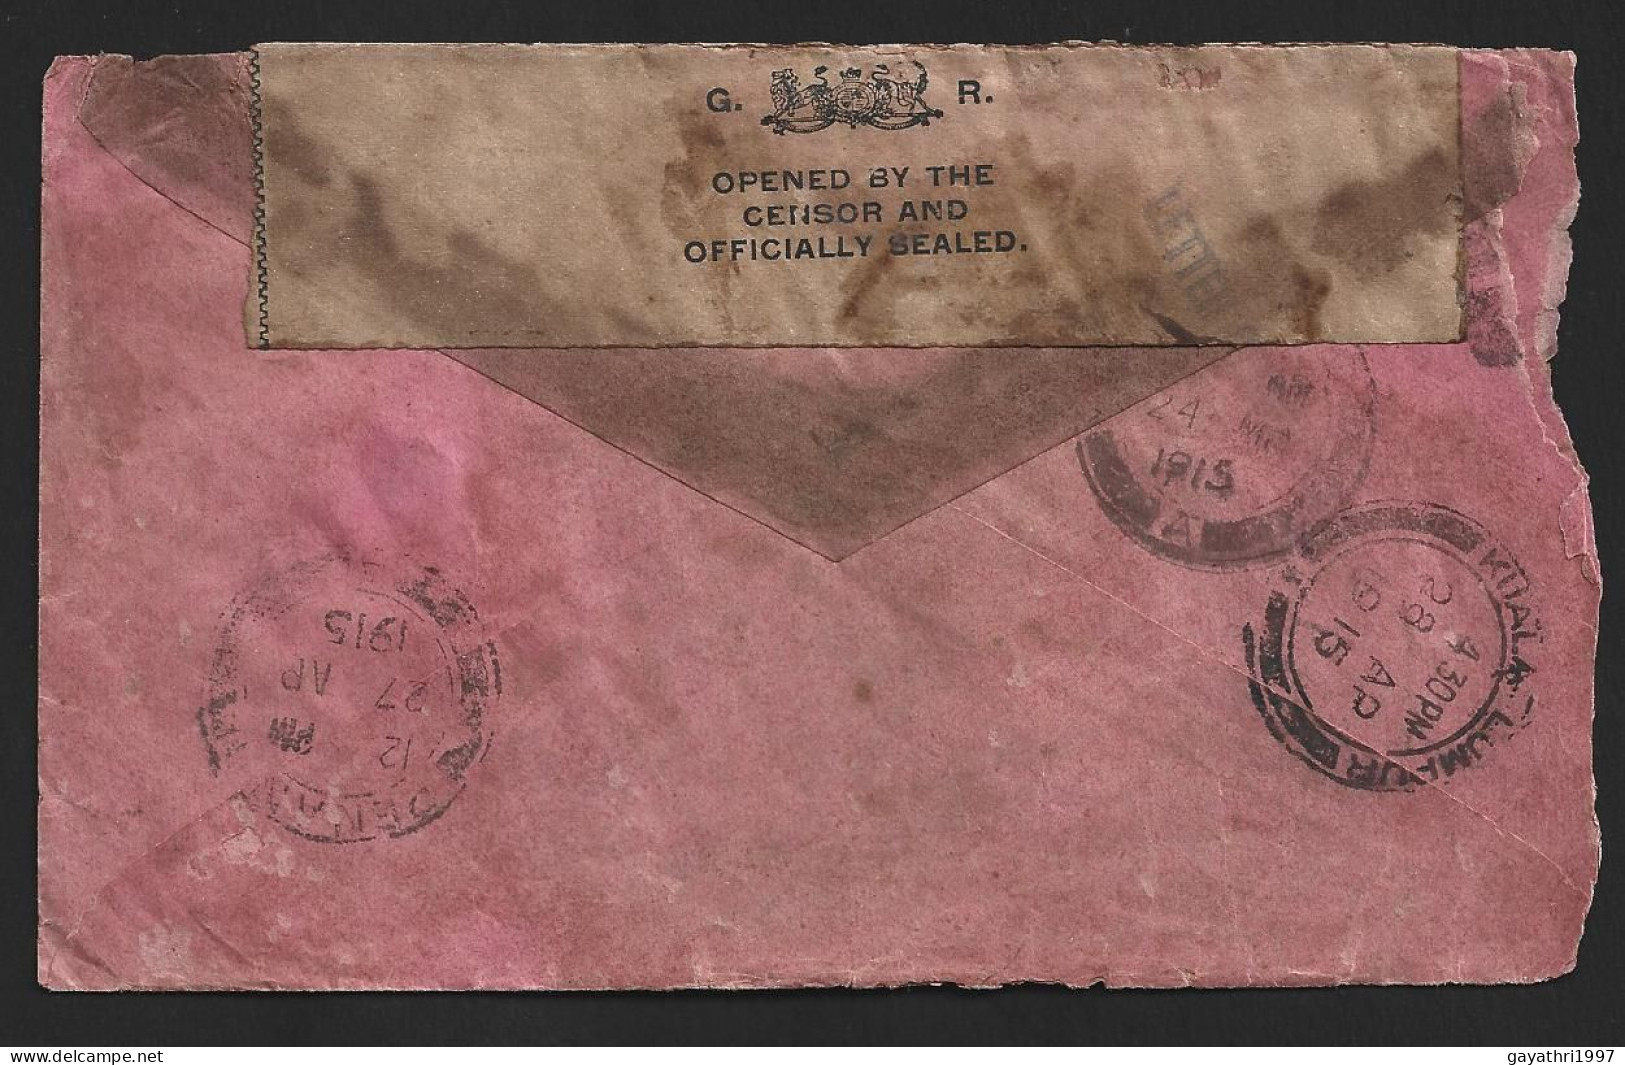 1915. India Stamp On Cover From S. India To F.M.S. WITH Straits Settlements Opened By The Censor And Officially Sealed - Cinderellas